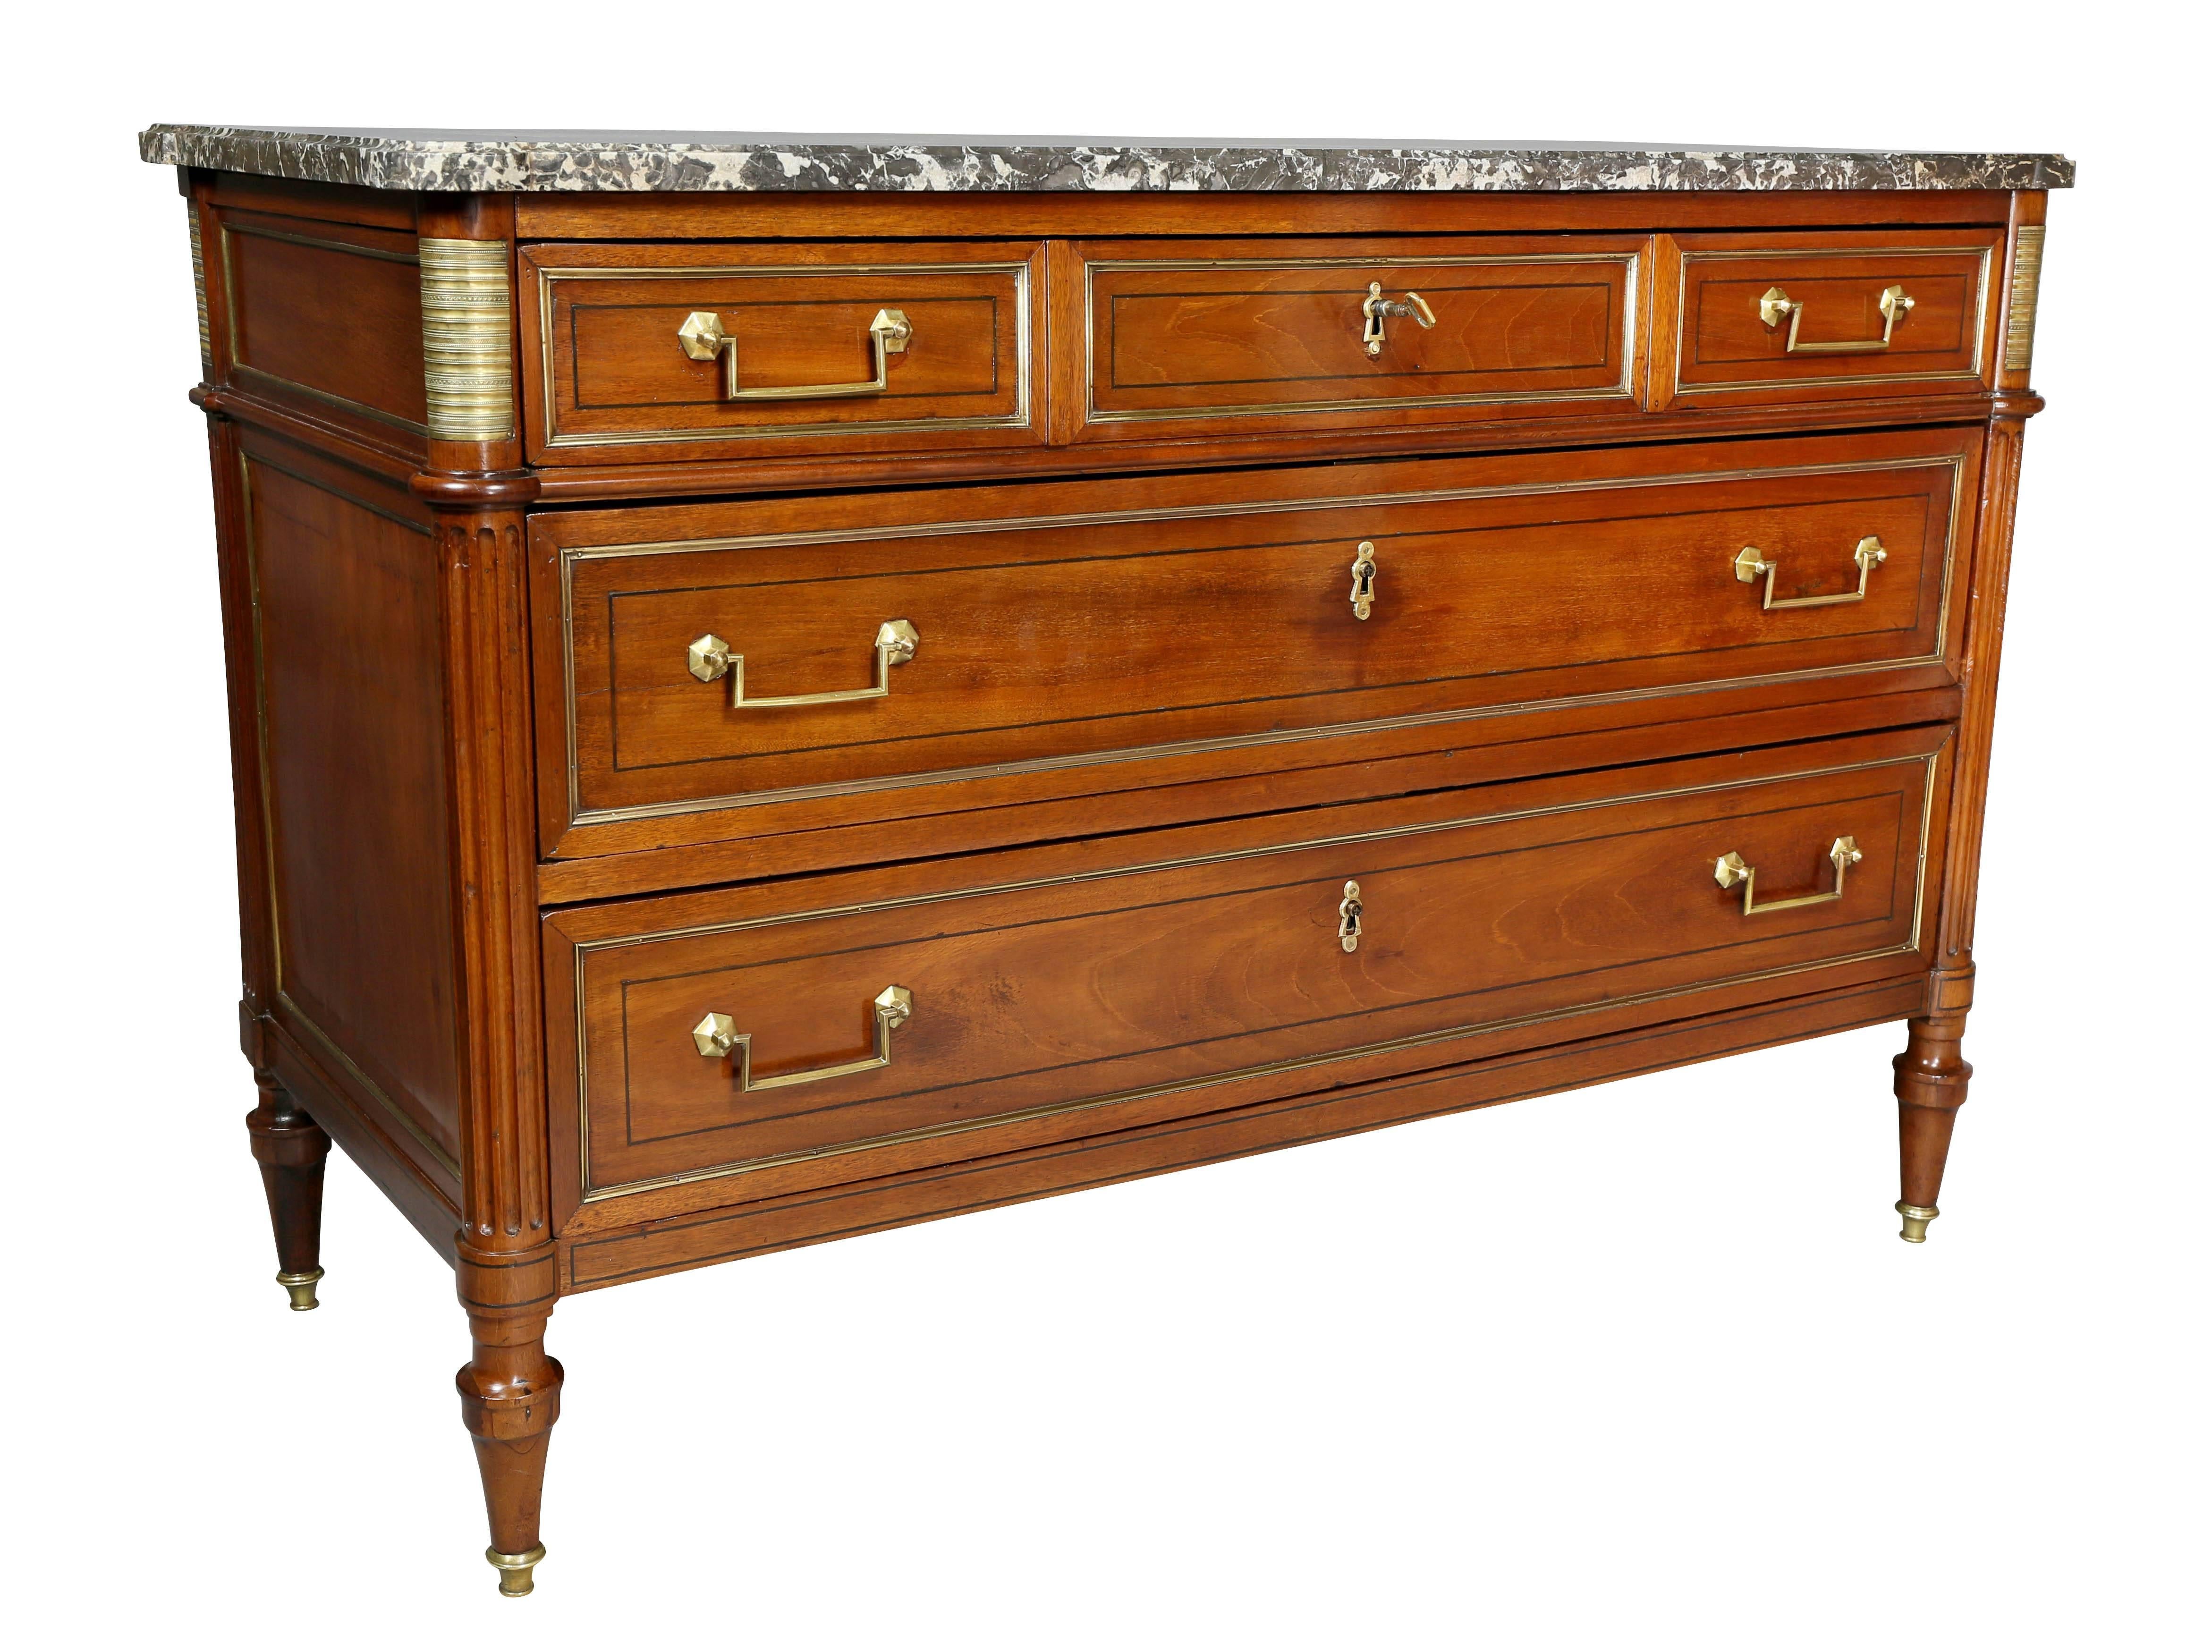 Rectangular St Anne gray marble top with rounded corners, over three drawers flanked by reeded columns all brass-mounted, raised on circular tapered legs.